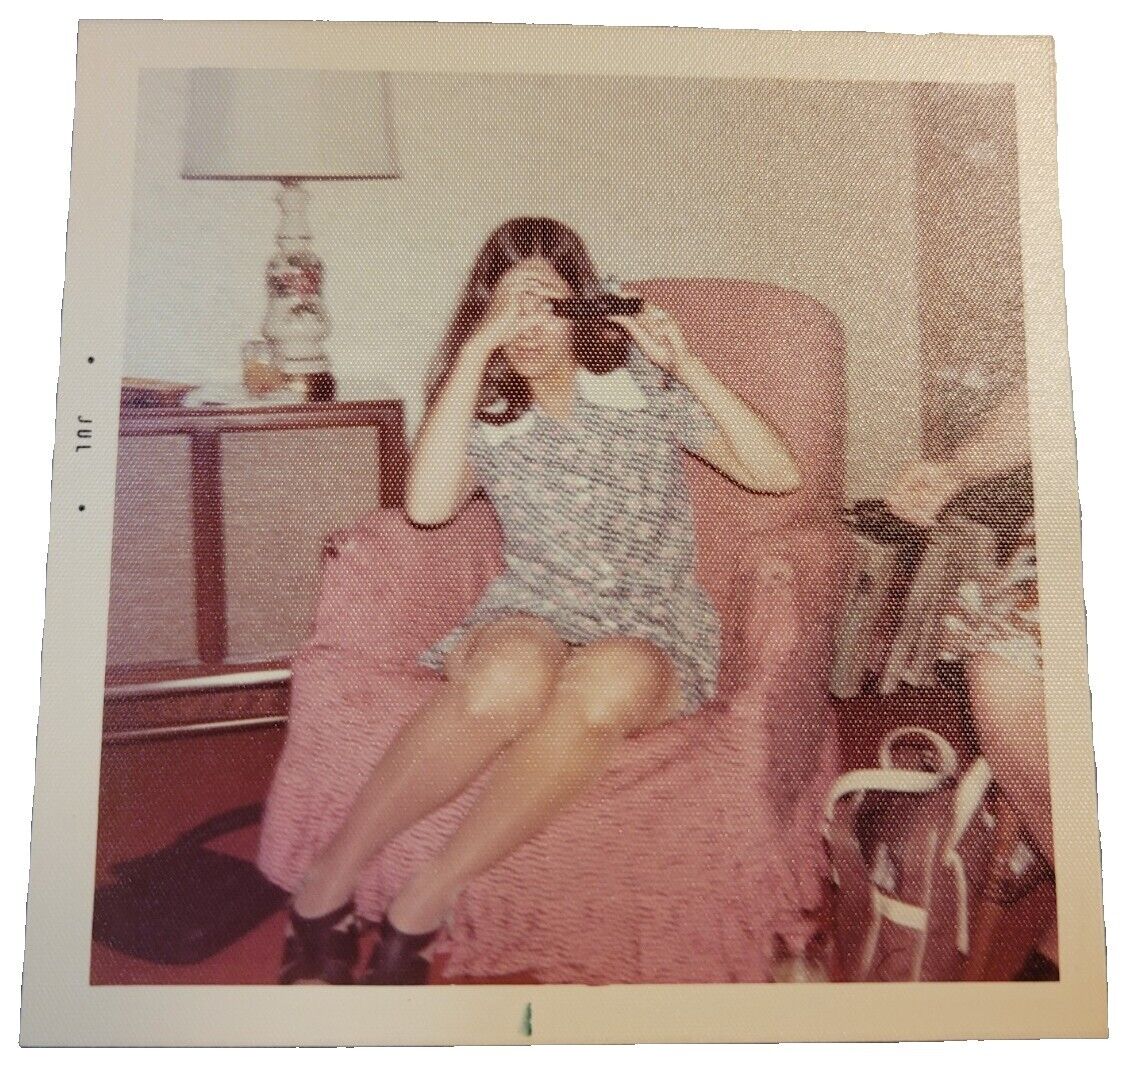 1970s American Teen Girl Sitting in Chair using Camera Photo Color Vtg Snapshot